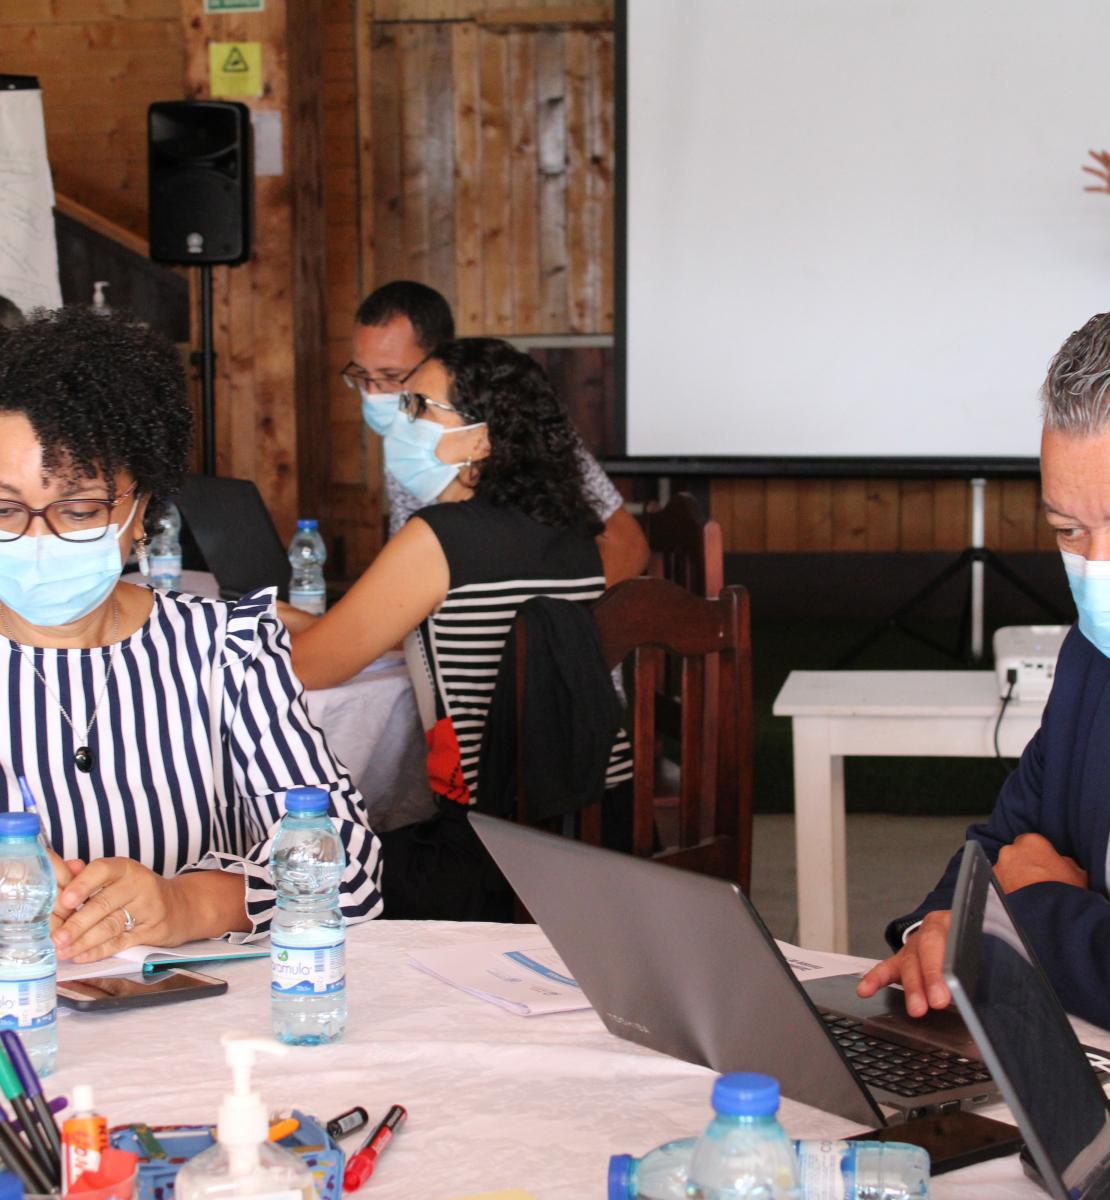 A group of people taking part in the strategic planning exercise in Praia, Cabo Verde.